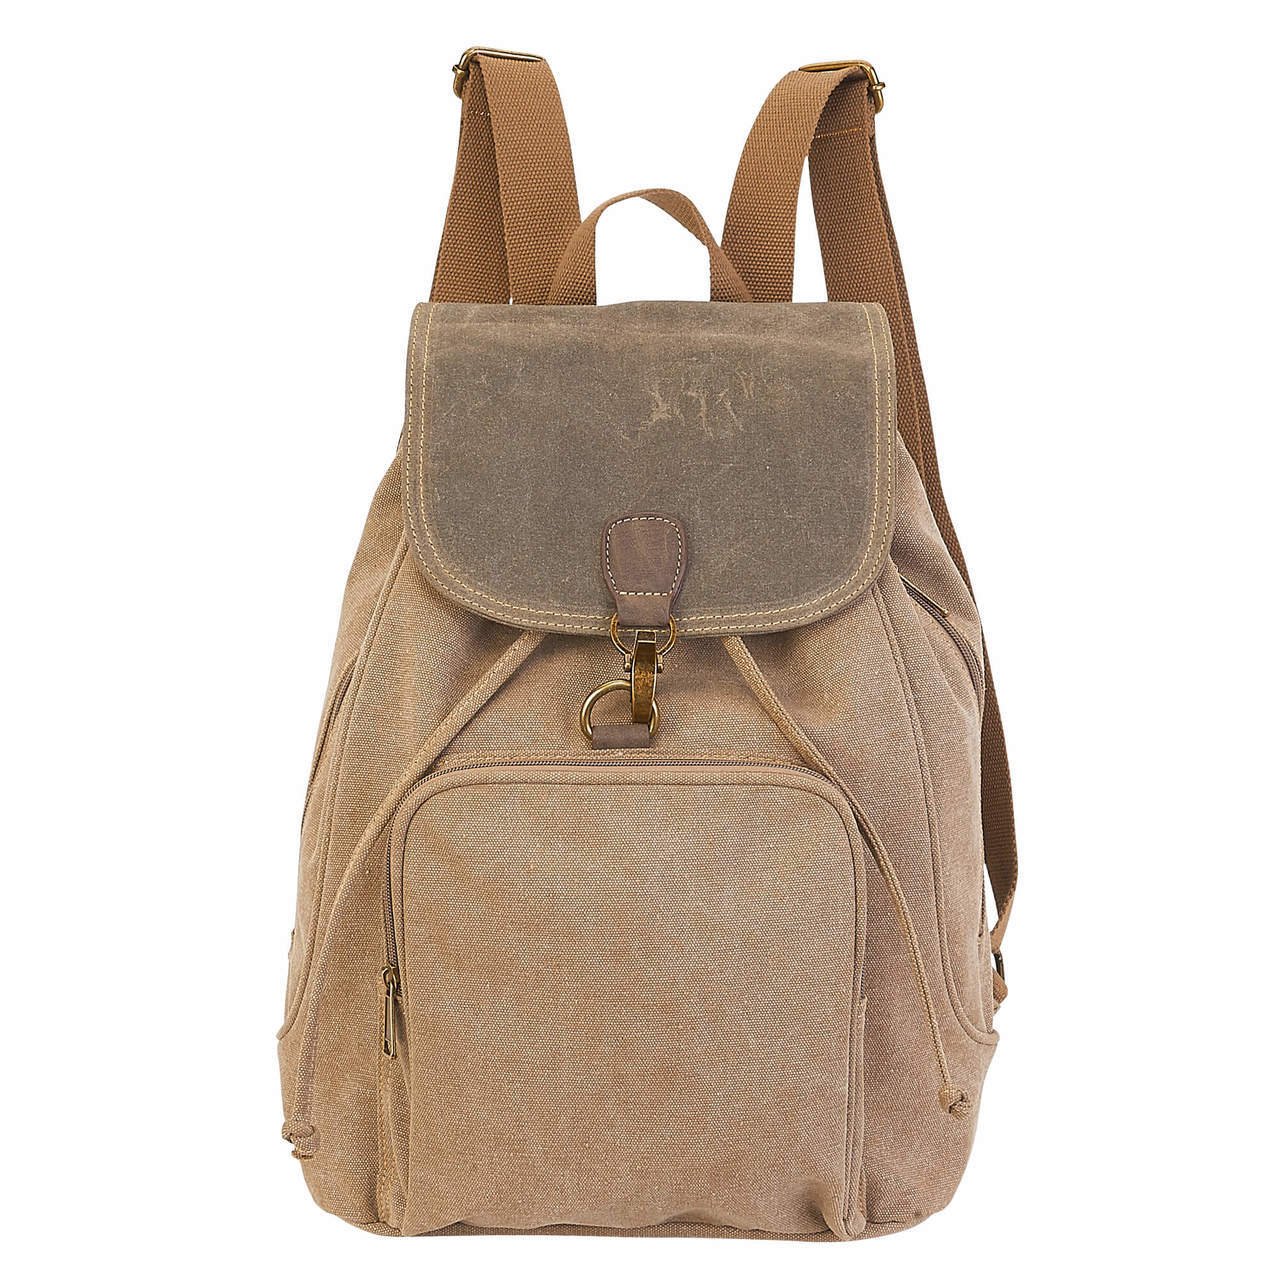 Rustic Flap Over Backpack